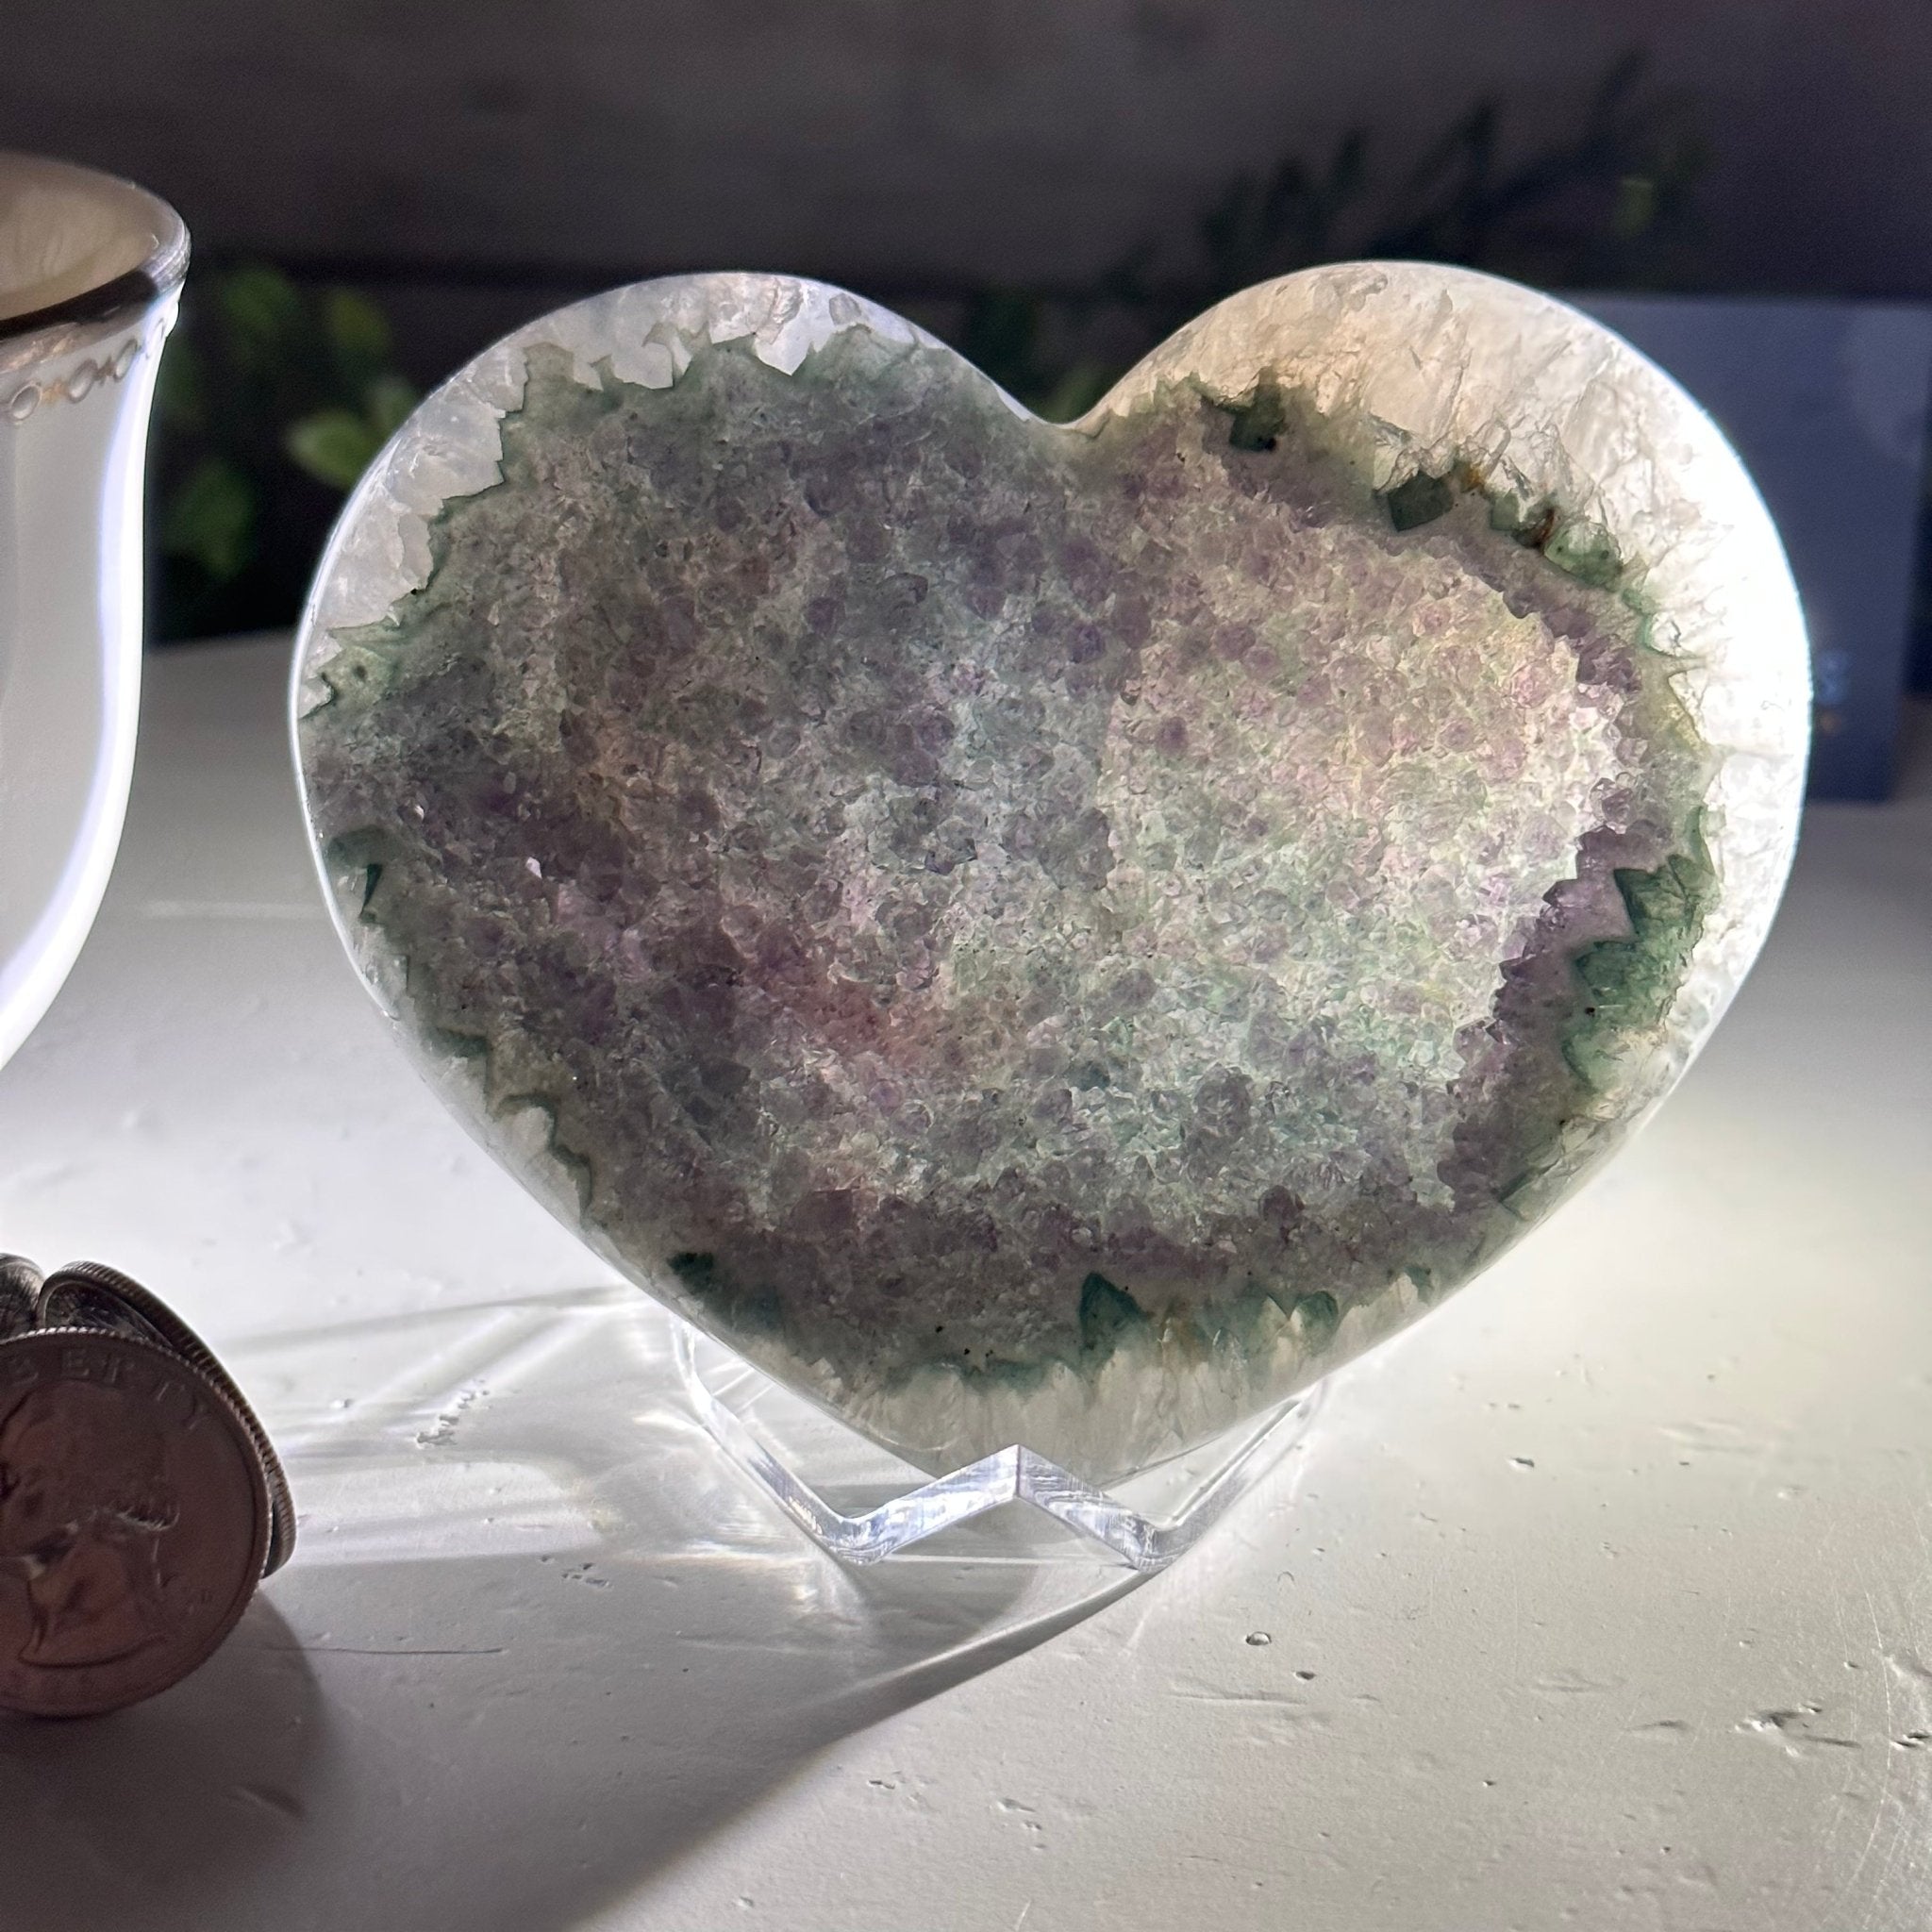 Extra Quality Amethyst Heart Geode on an Acrylic Stand, 0.75 lbs & 3" Tall #5462-0046 by Brazil Gems - Brazil GemsBrazil GemsExtra Quality Amethyst Heart Geode on an Acrylic Stand, 0.75 lbs & 3" Tall #5462-0046 by Brazil GemsHearts5462-0046